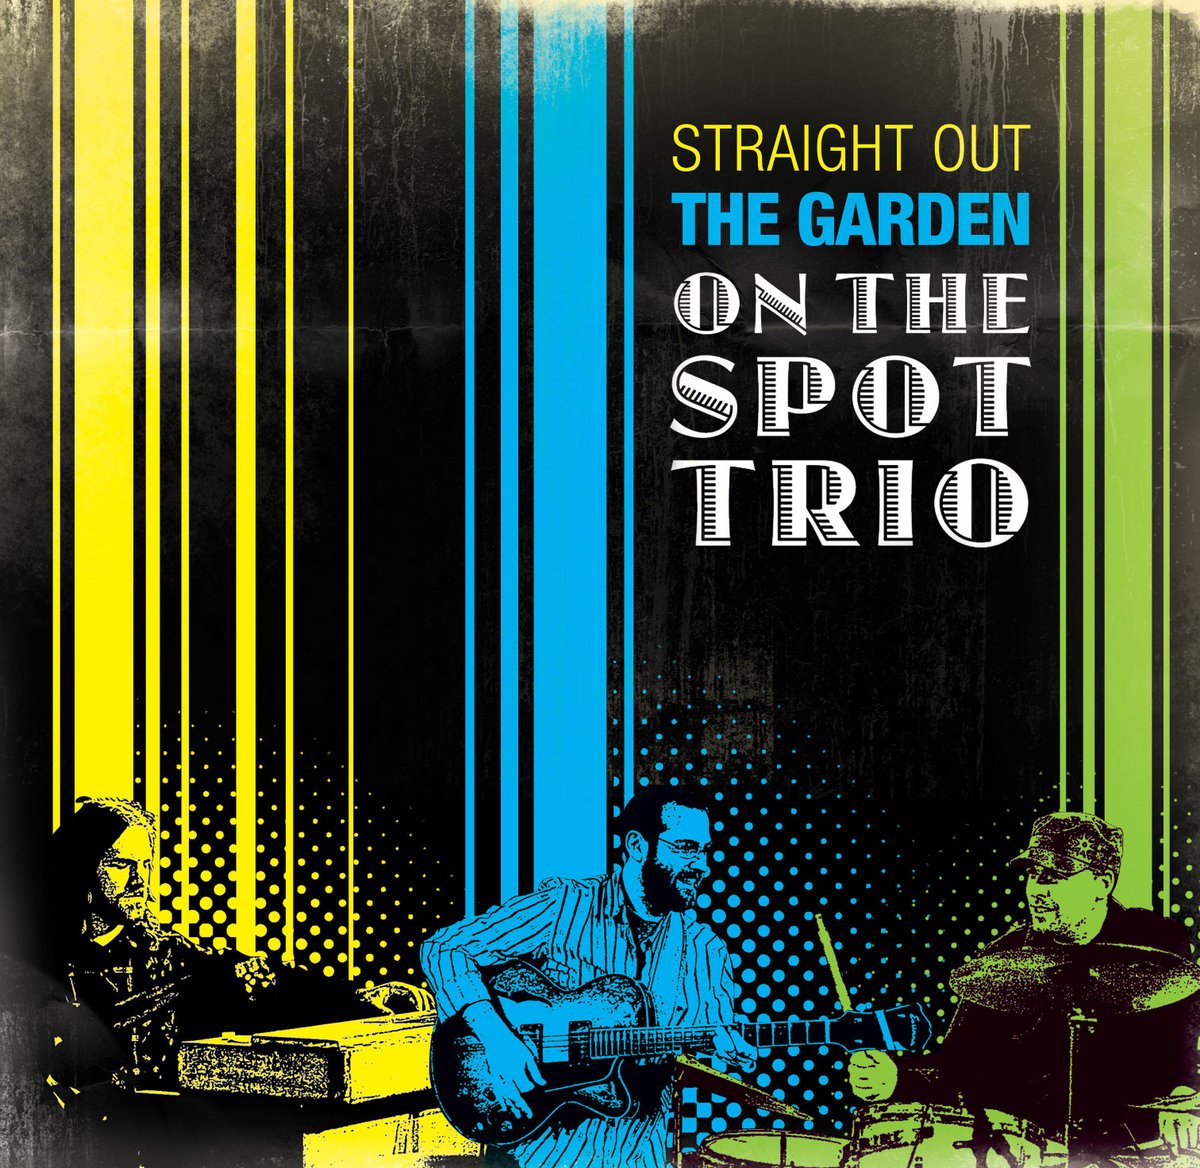 On The Spot Trio Straight Out The Garden.jpeg